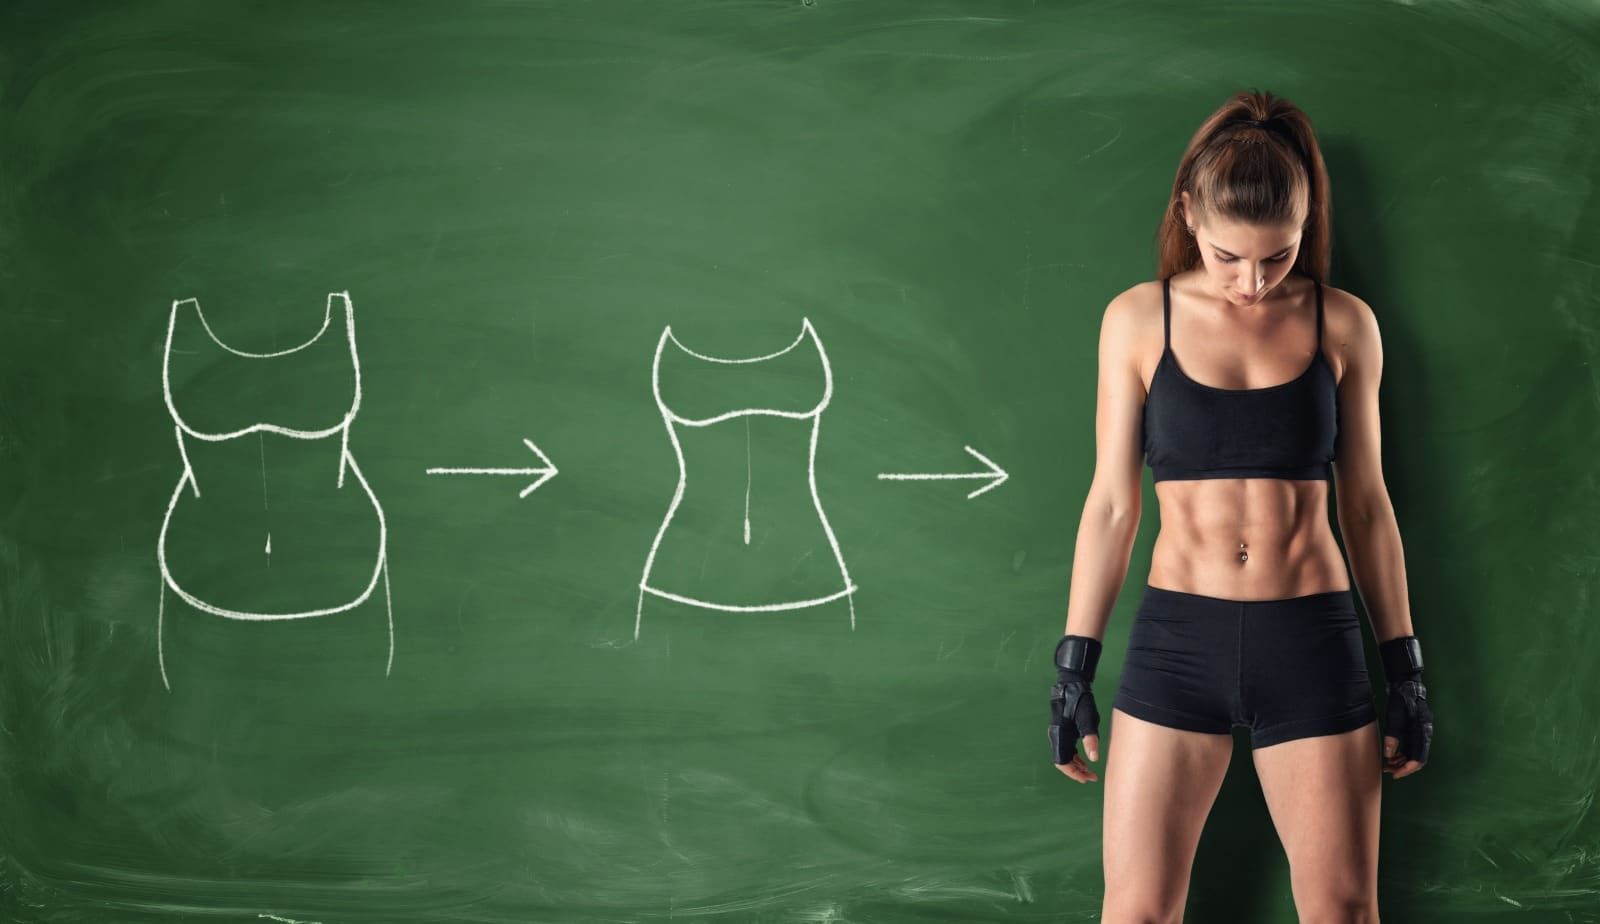 Can weight loss improve my body composition and reduce body fat